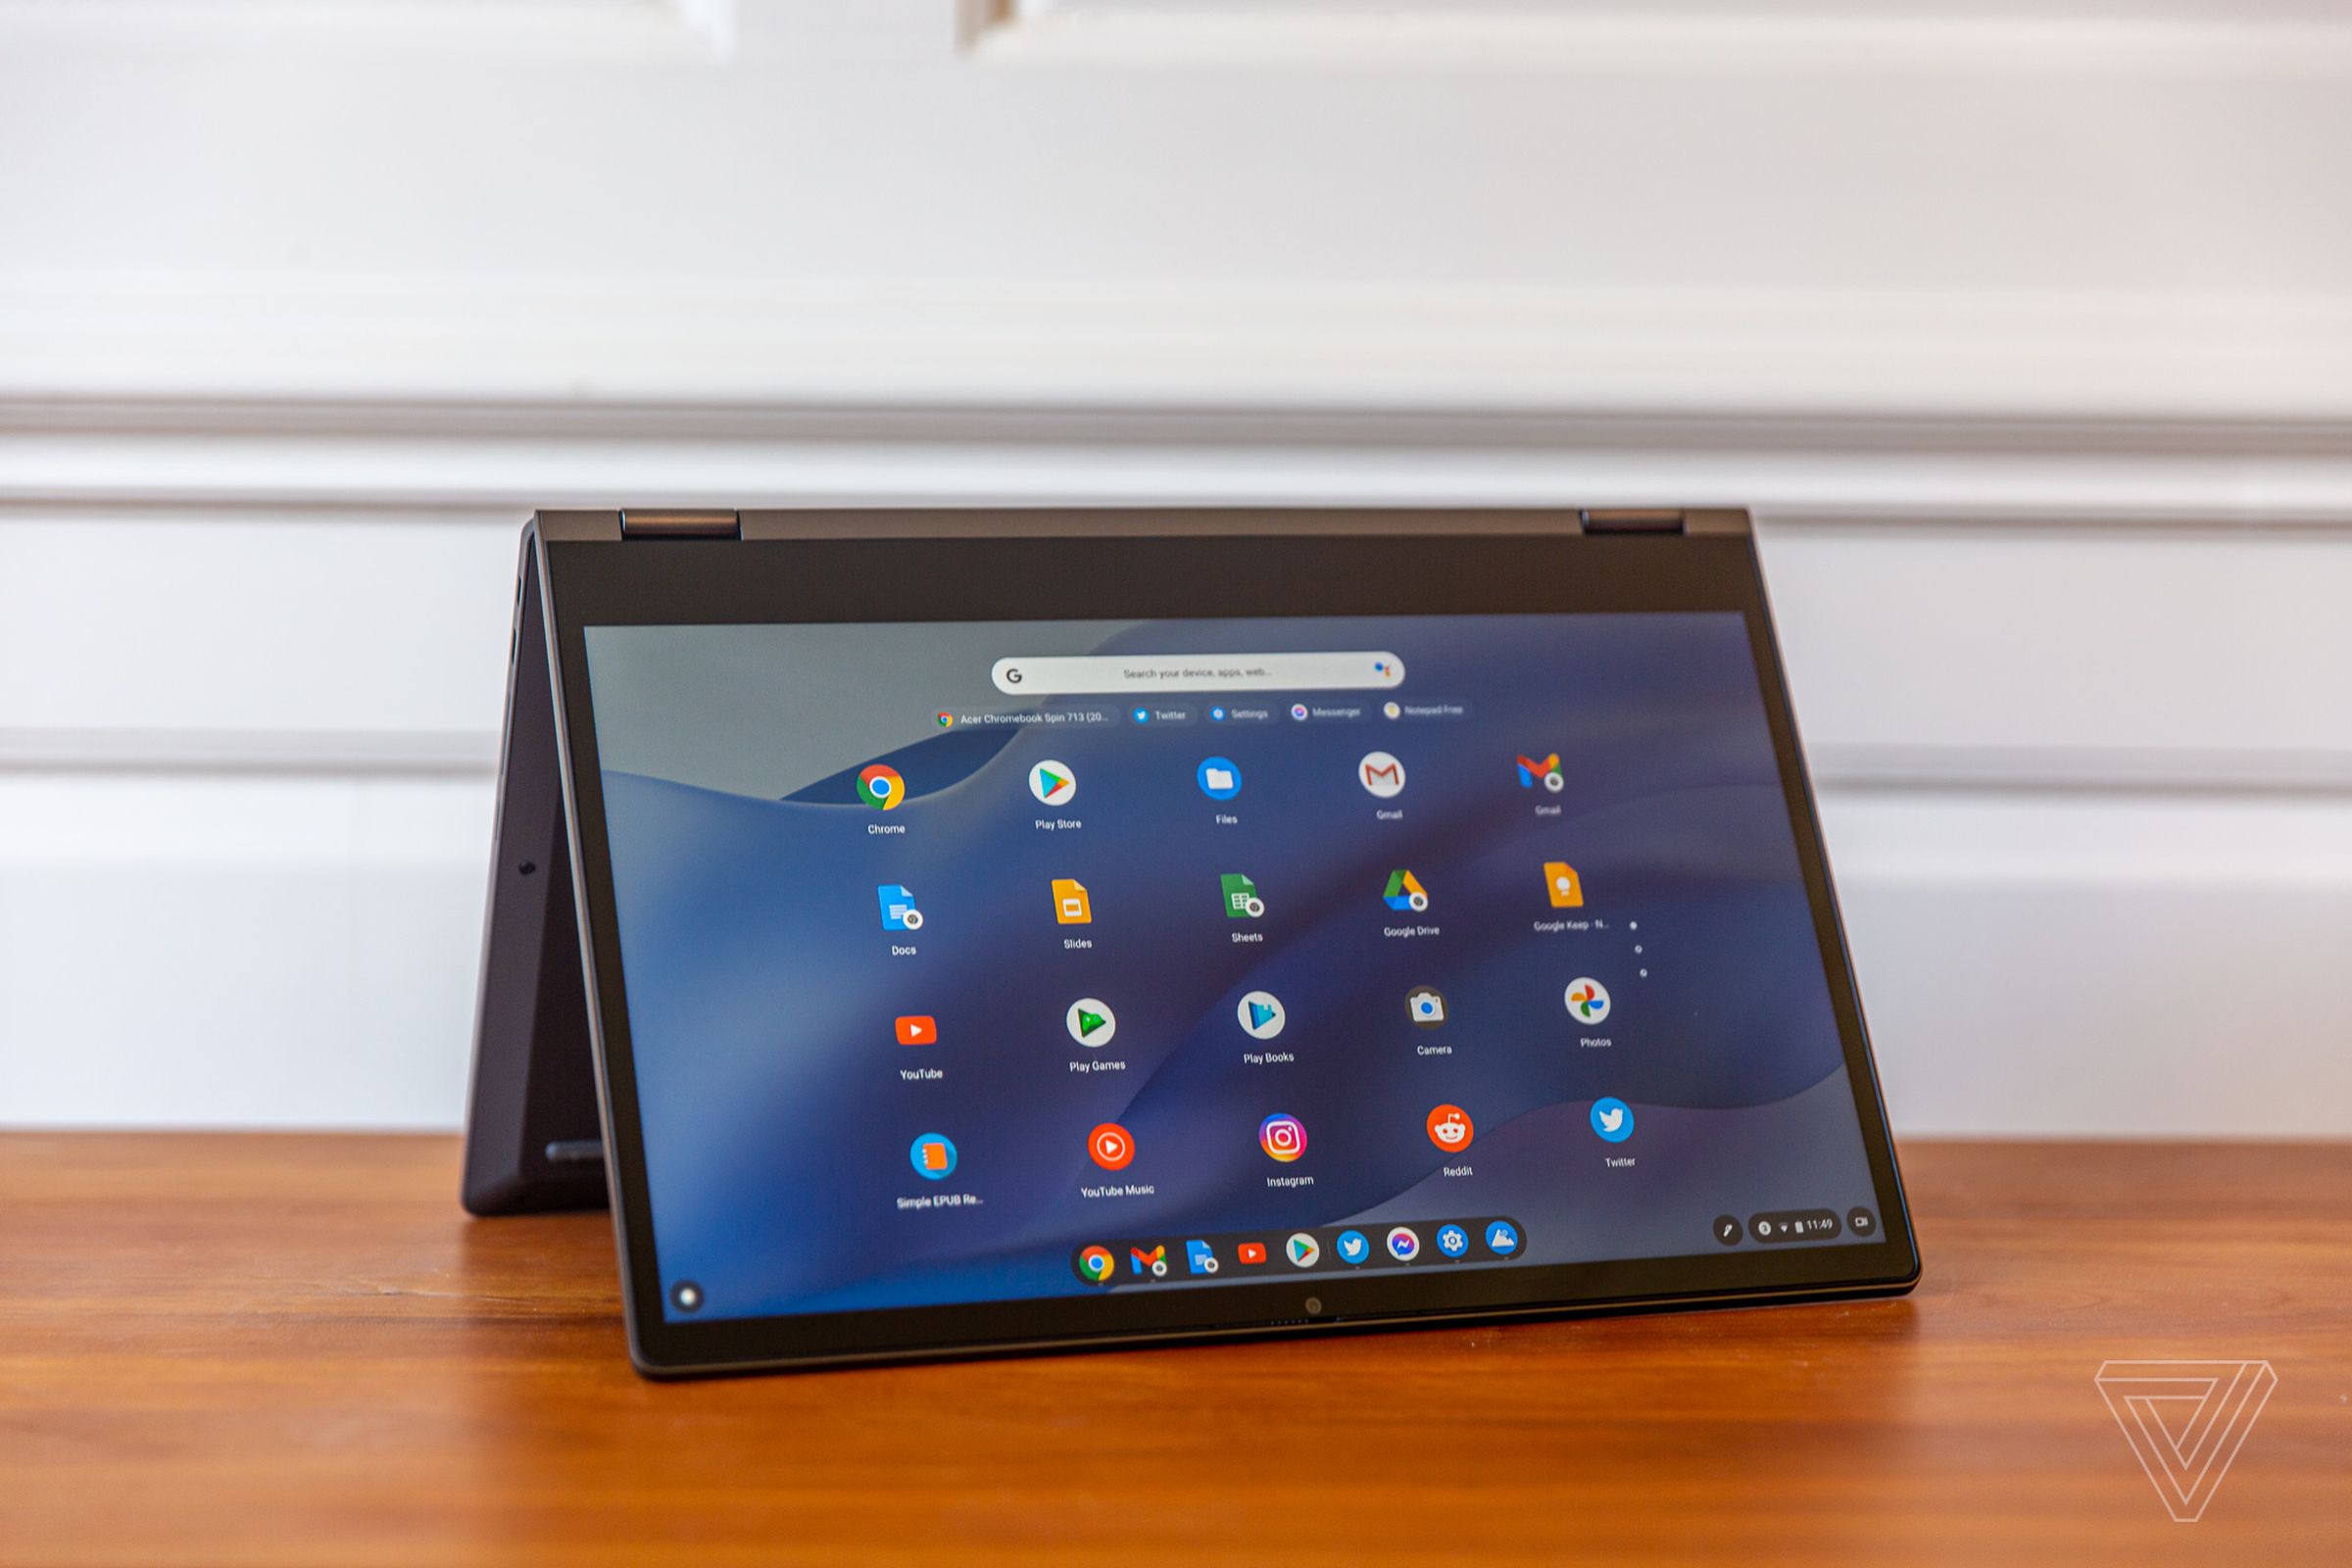 The Lenovo Flex 5 Chromebook in tent mode, angled to the right. The screen displays a grid of Chrome OS apps on a blue wavy background.